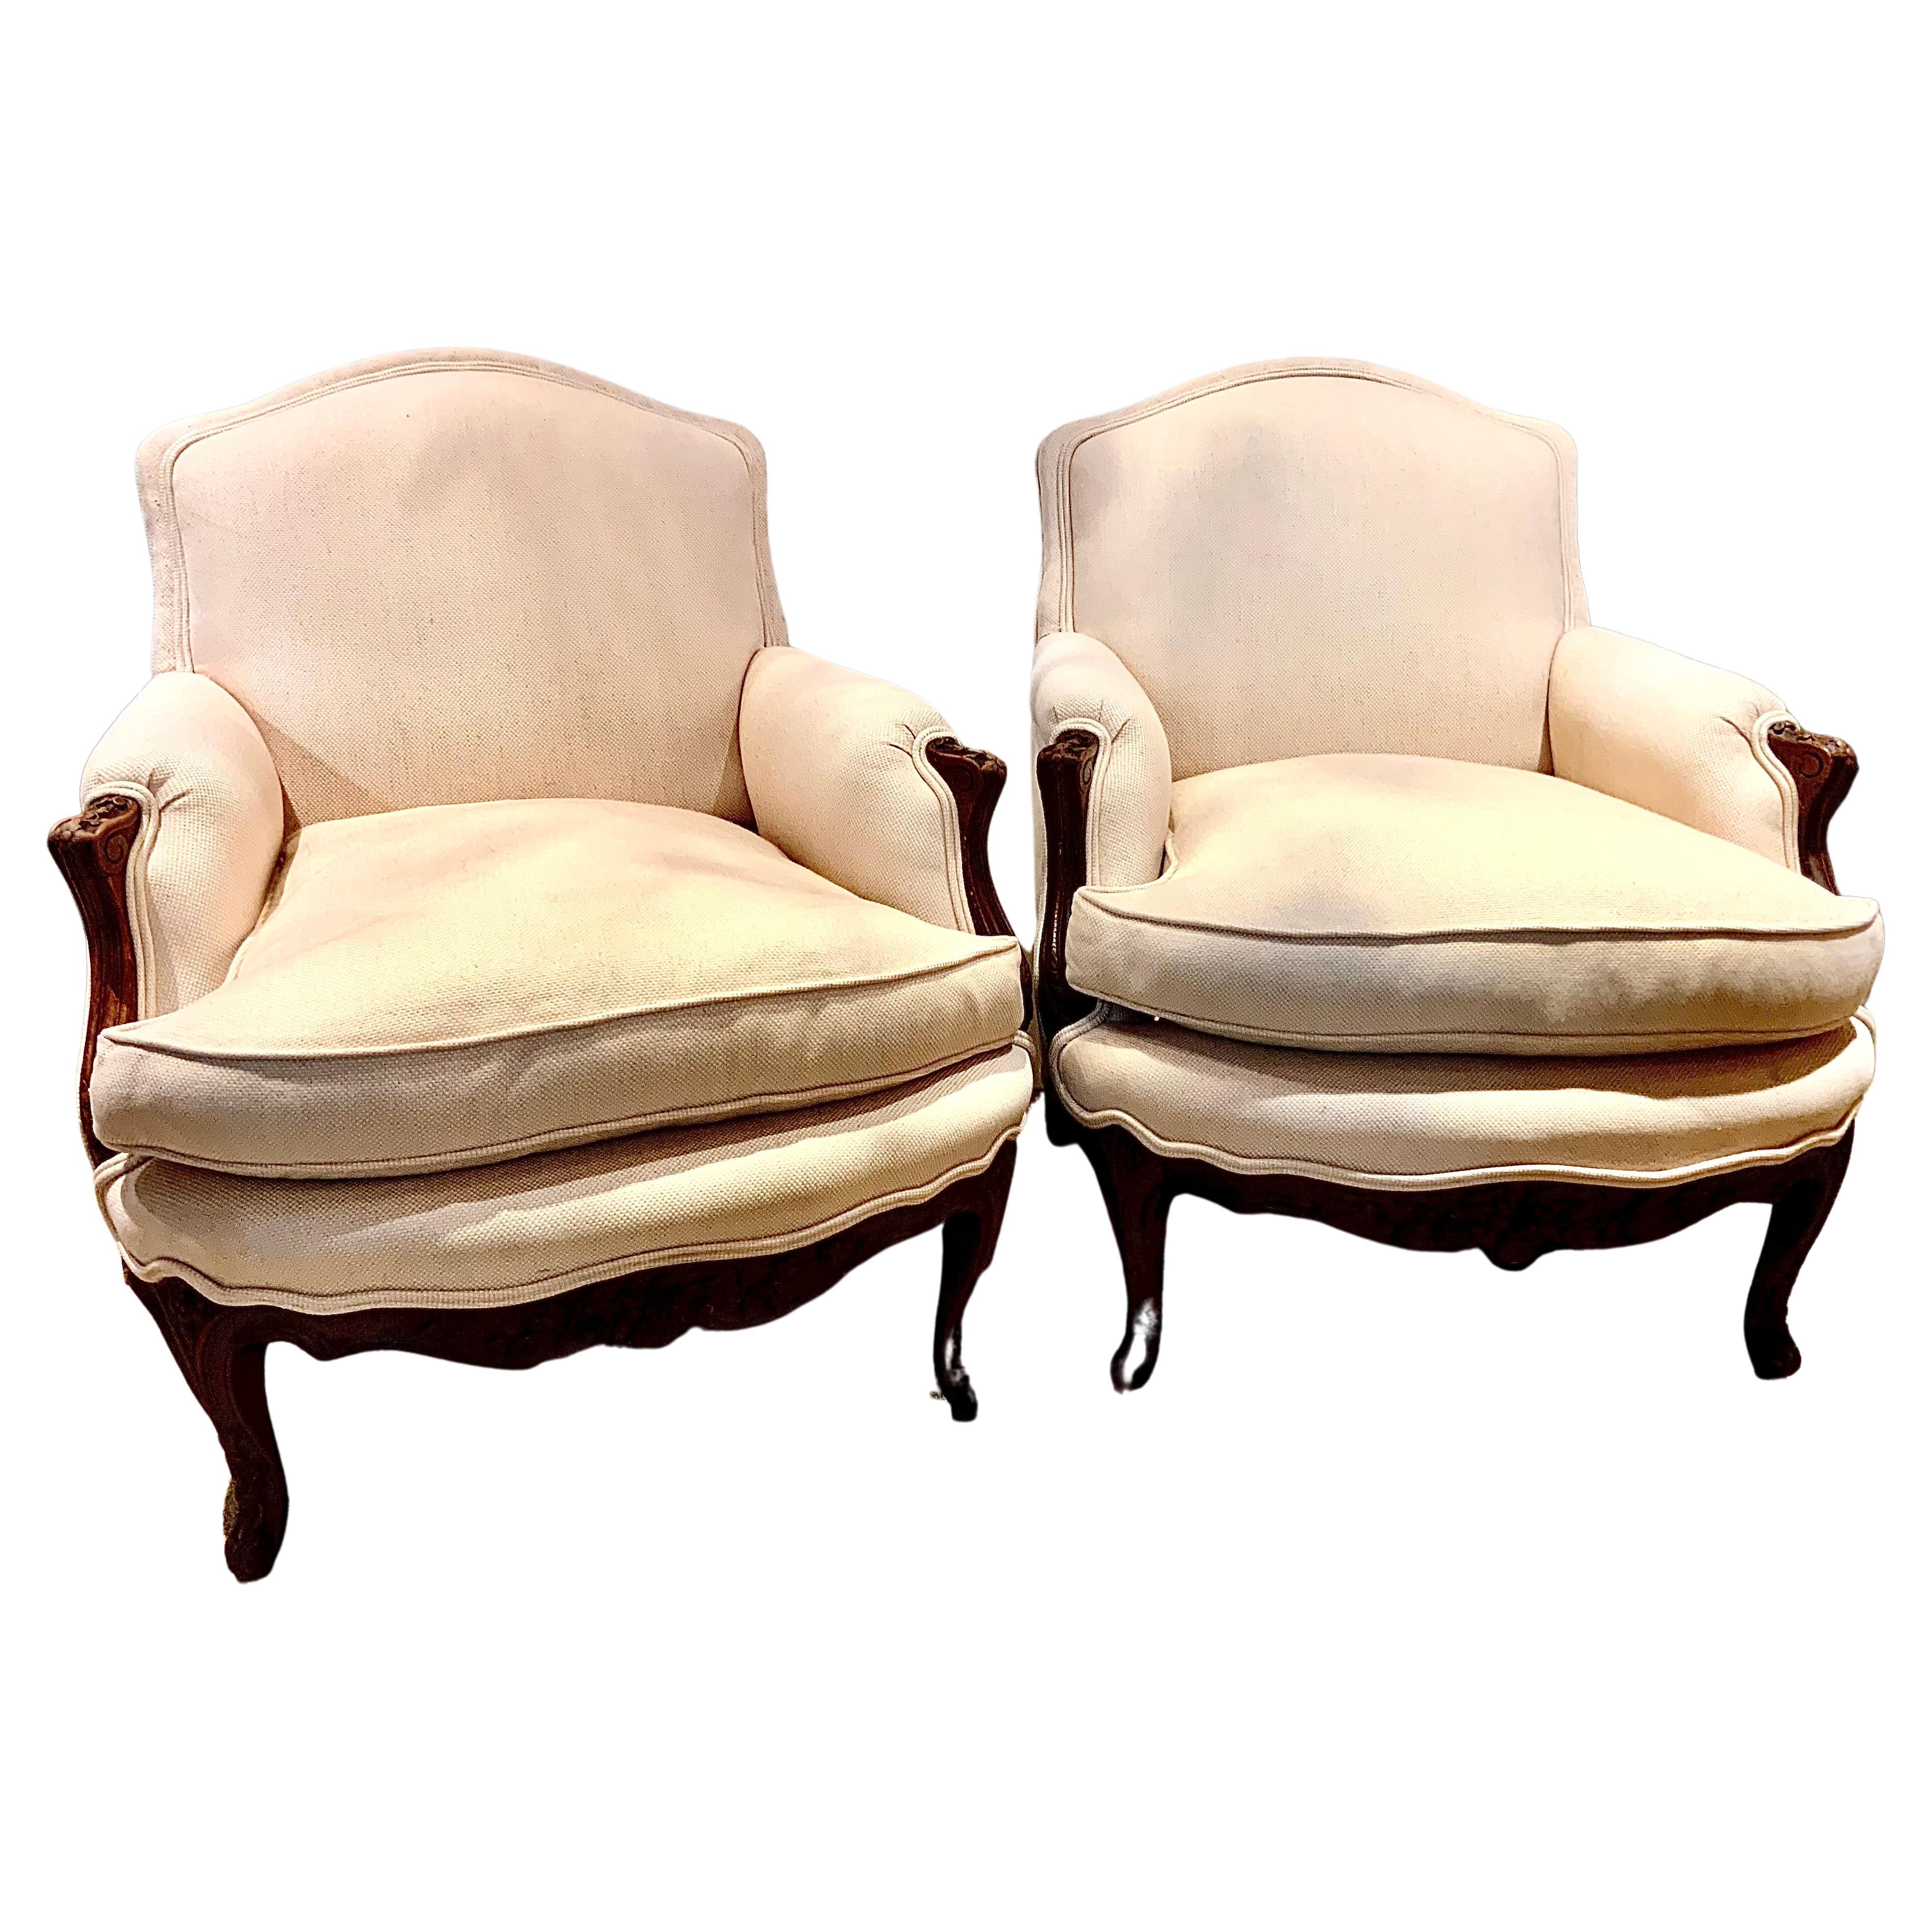 Pair of French Bergere Chairs, Louis XV-Style in Cream / White Hues For Sale